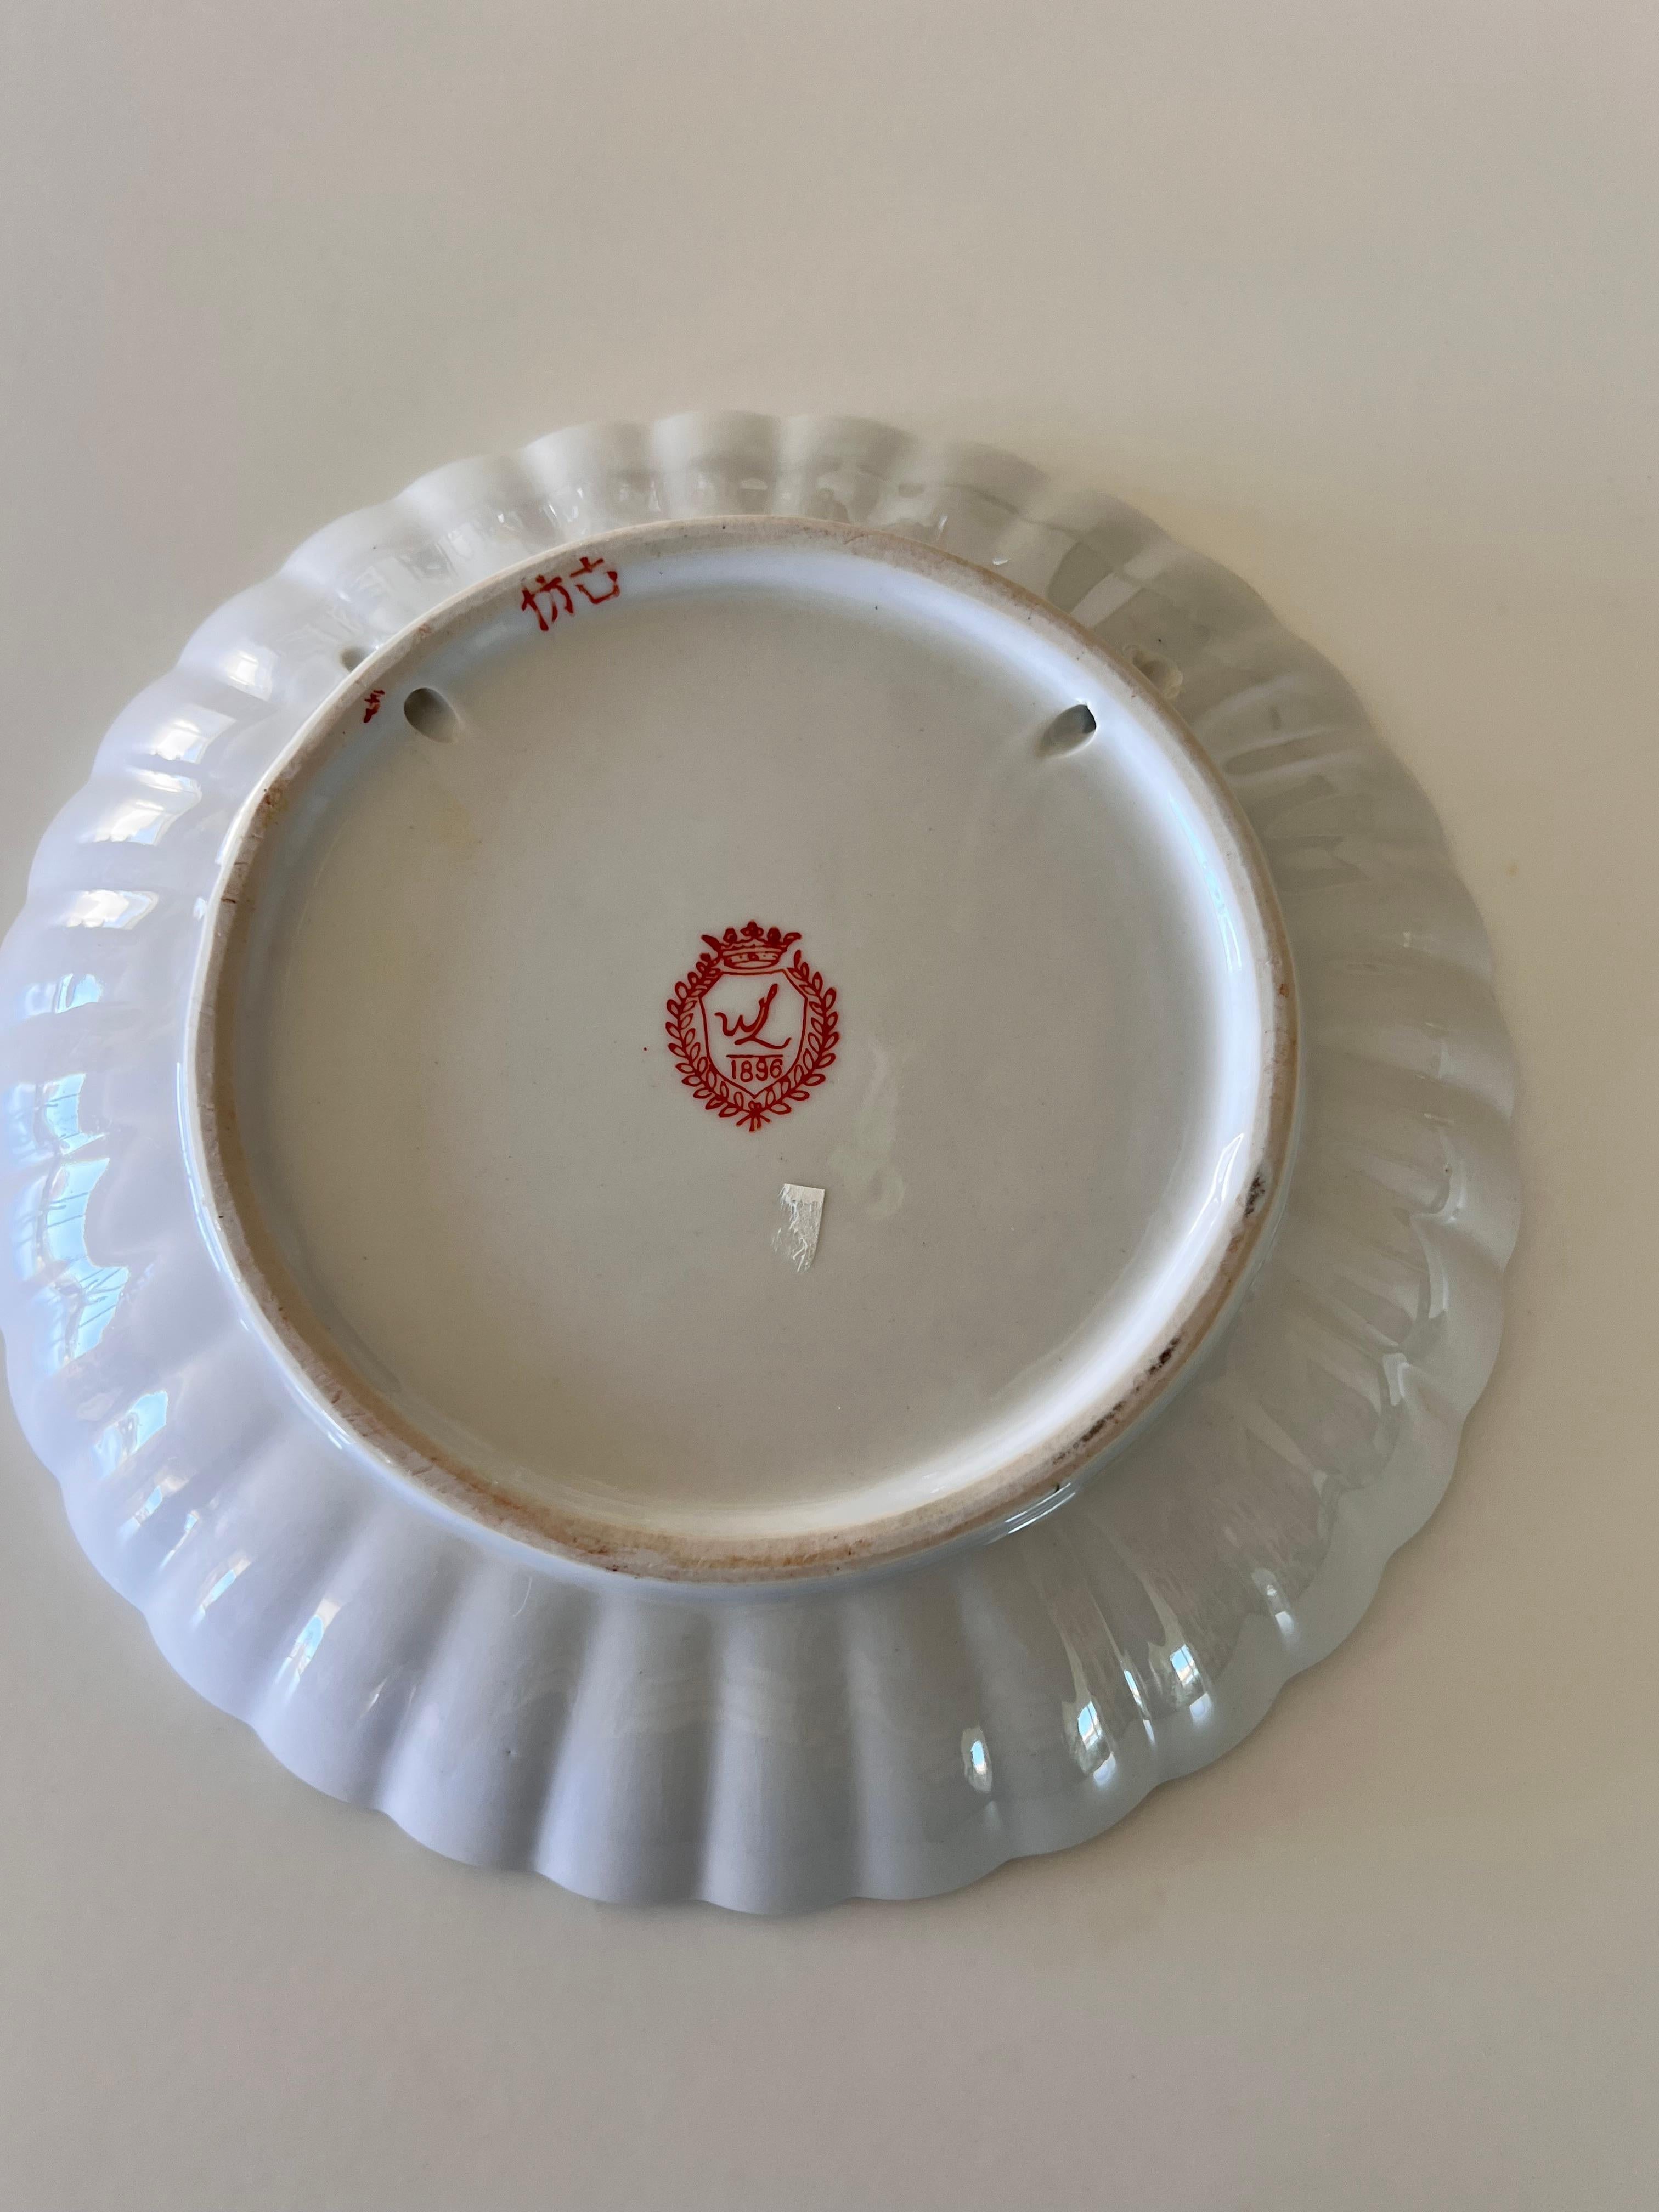 Aesthetic Movement Ceramic Decorative Flower and Vegetation Chinese Plate Signed WL, 1896 For Sale